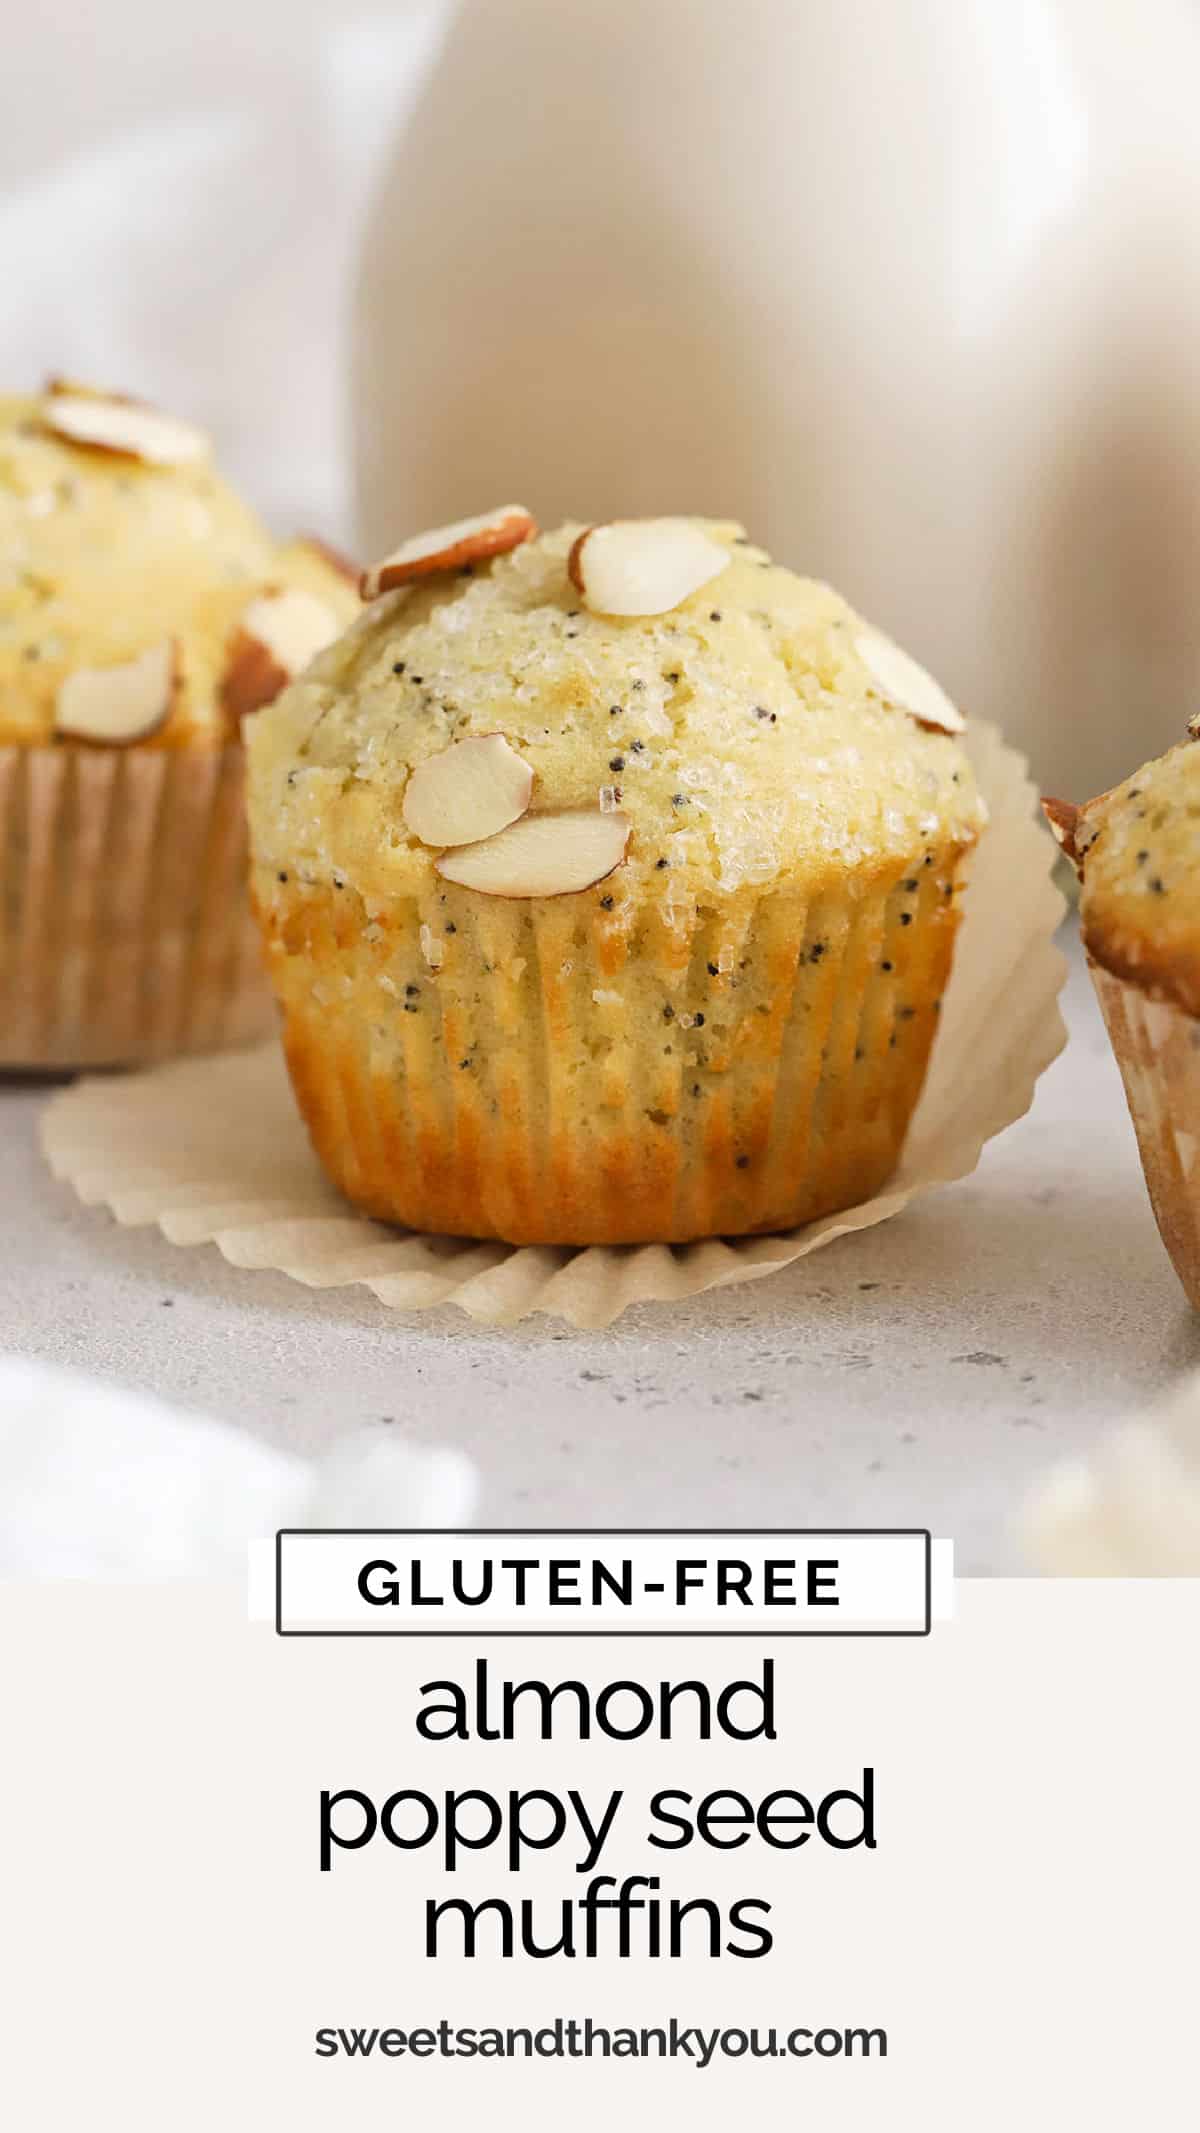 This gluten-free almond poppy seed muffins recipe is made from scratch with simple ingredients for BIG flavor. You'll love the fluffy texture! They make a delicious gluten-free breakfast or gluten-free brunch recipe any day. (Plus, don't miss our tips for ultra-fluffy gluten-free muffins every time.!)